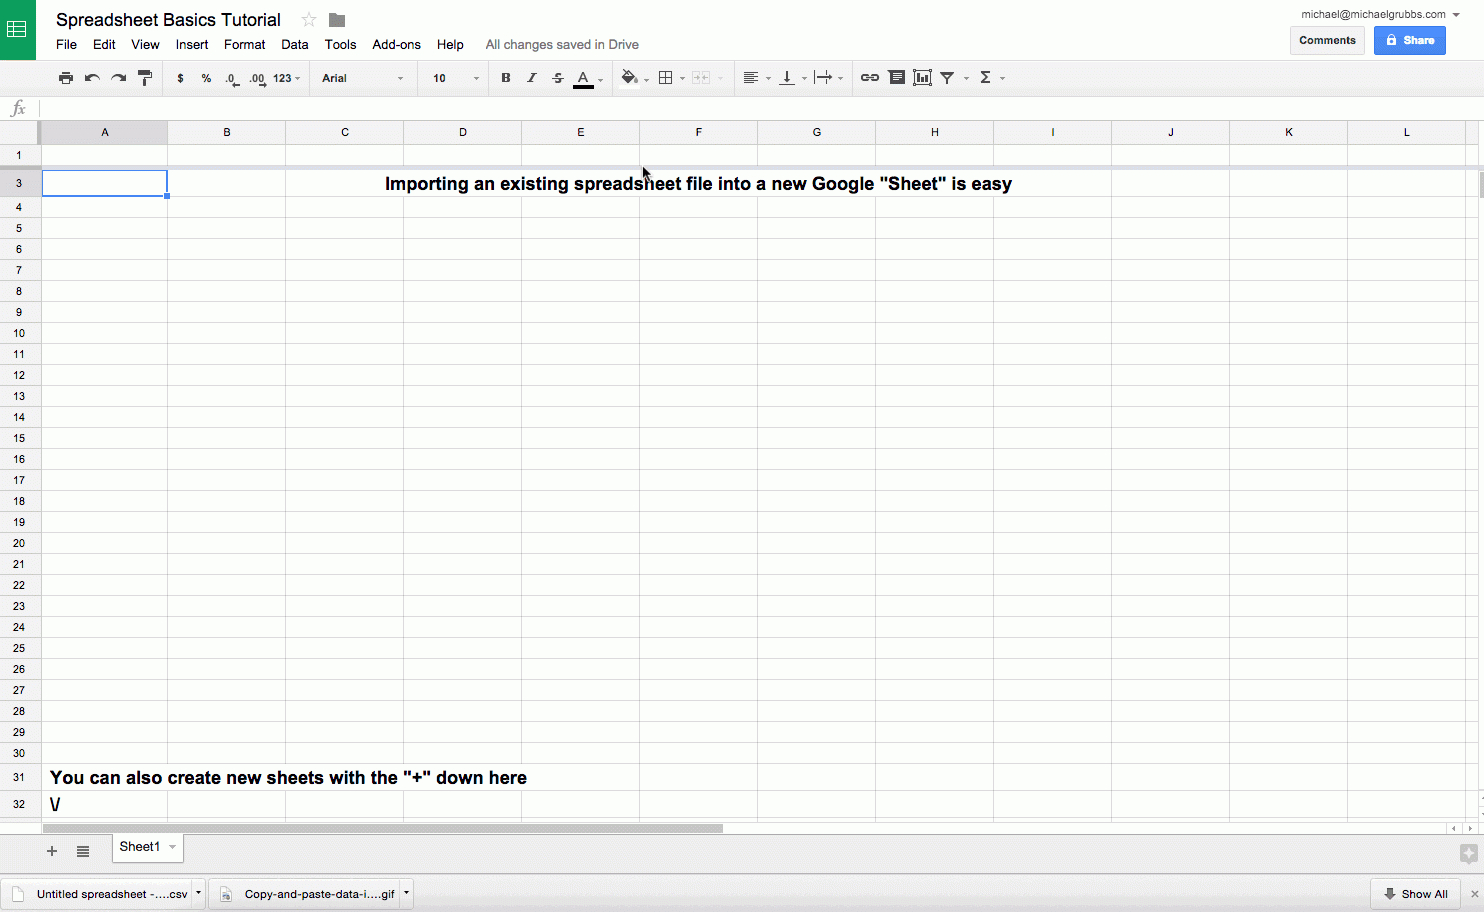 How To Make A Google Spreadsheet With Google Sheets 101: The Beginner's Guide To Online Spreadsheets  The